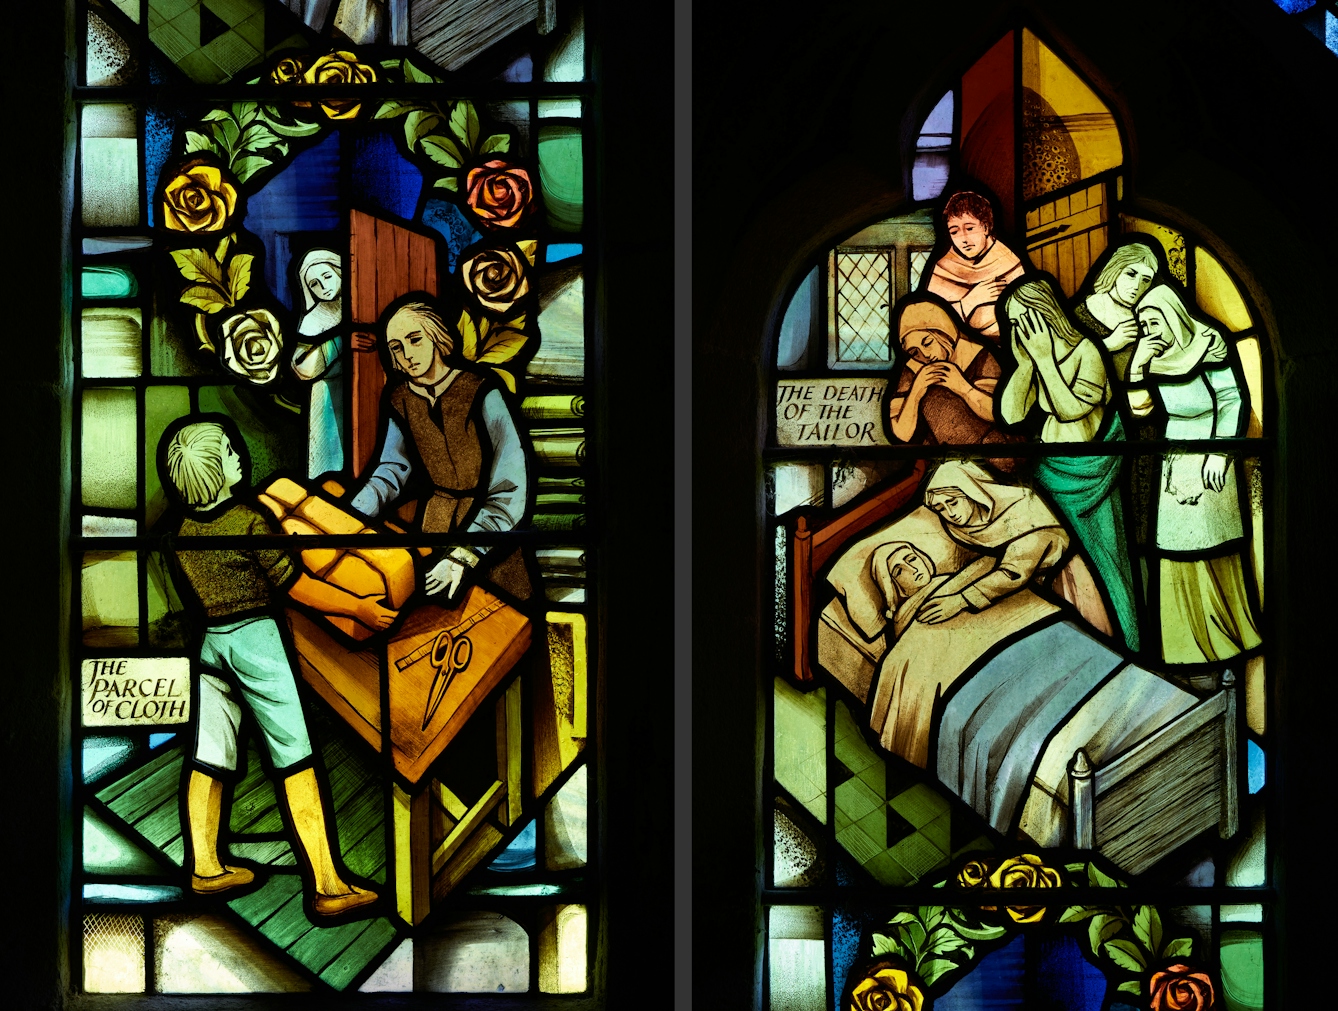 Photographic diptych showing modern stained glass windows in St Lawrence's Church in Eyam depicting scenes from the plague of 1665/6. On the left the image depicts the parcel arriving from London containing the contaminated cloth. On the right the image shows crying villagers surrounding the bed of a person suffering from the plague.